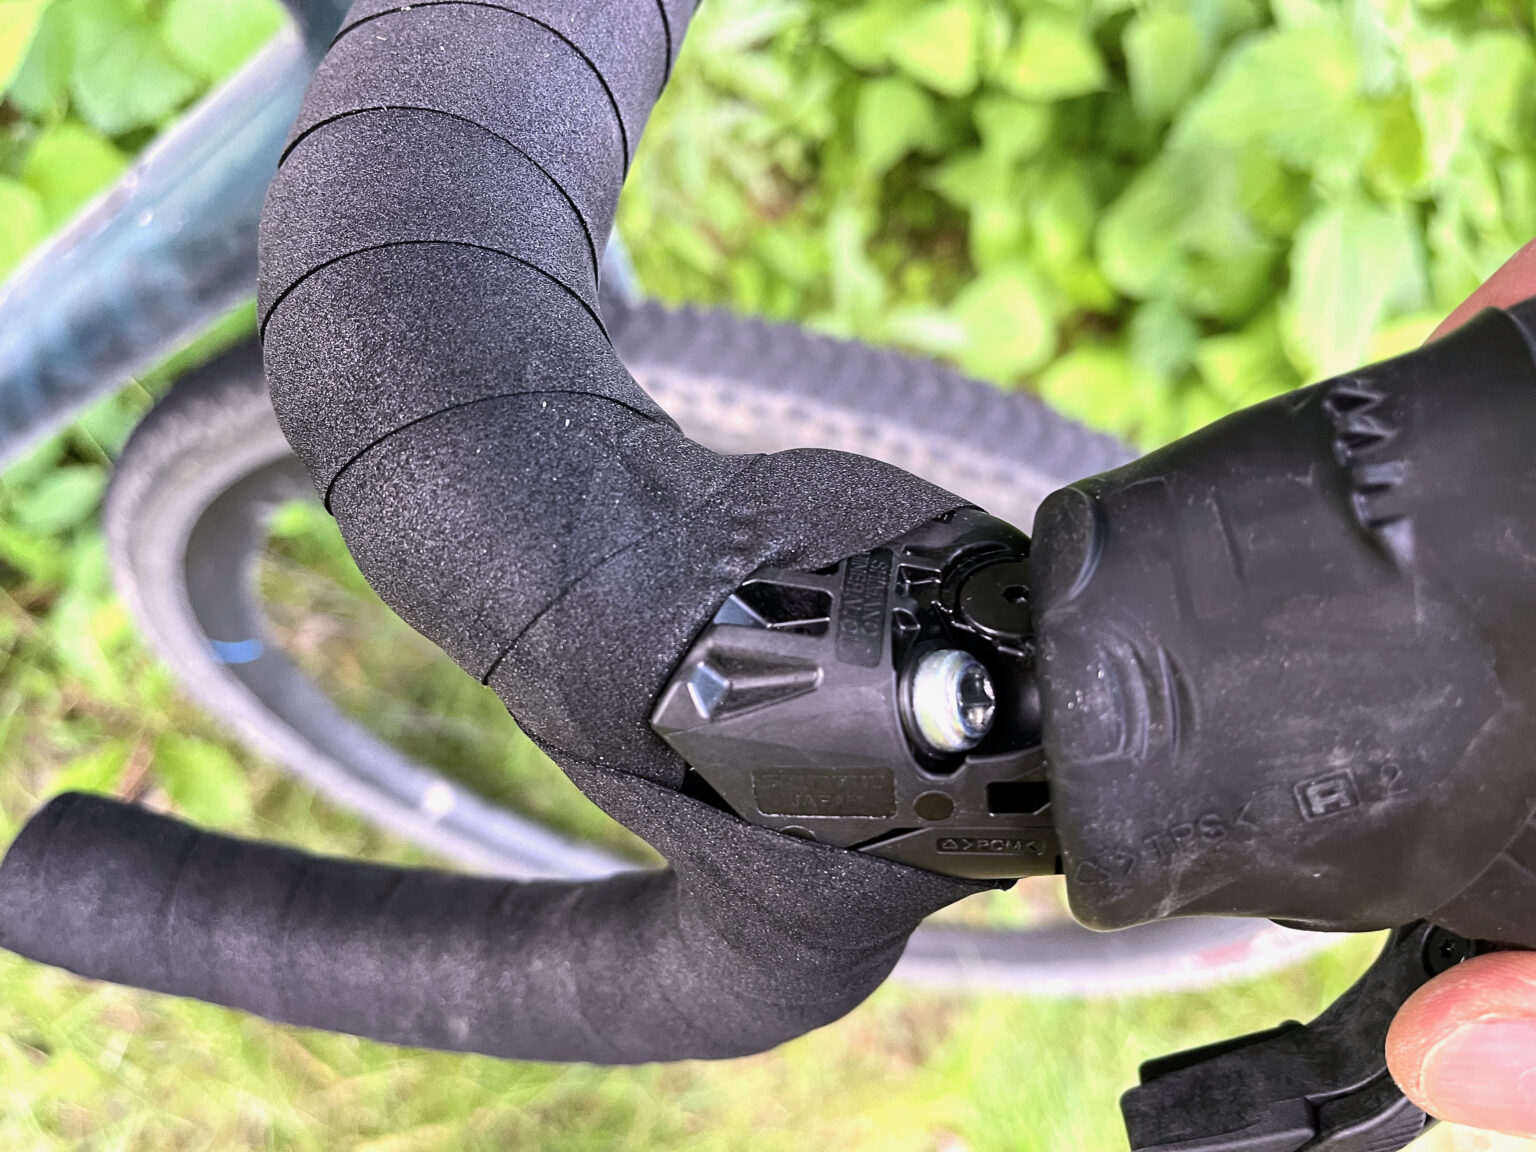 Shimano GRX Di2 12-speed Review adjustment